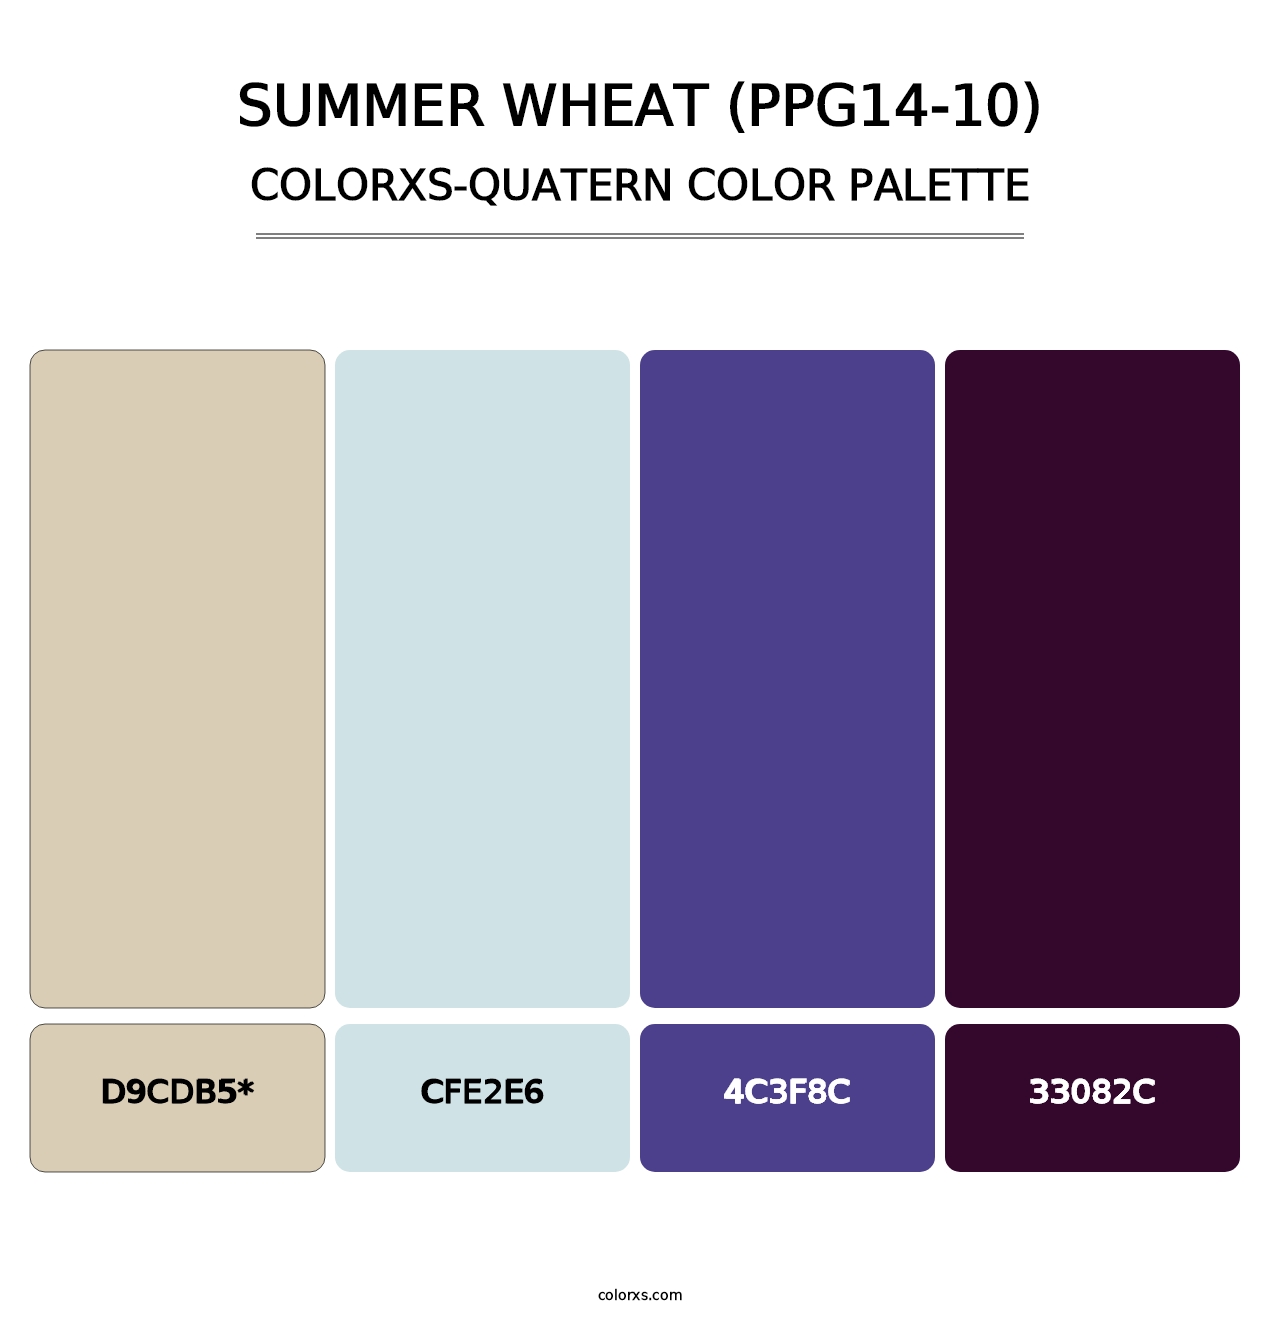 Summer Wheat (PPG14-10) - Colorxs Quatern Palette